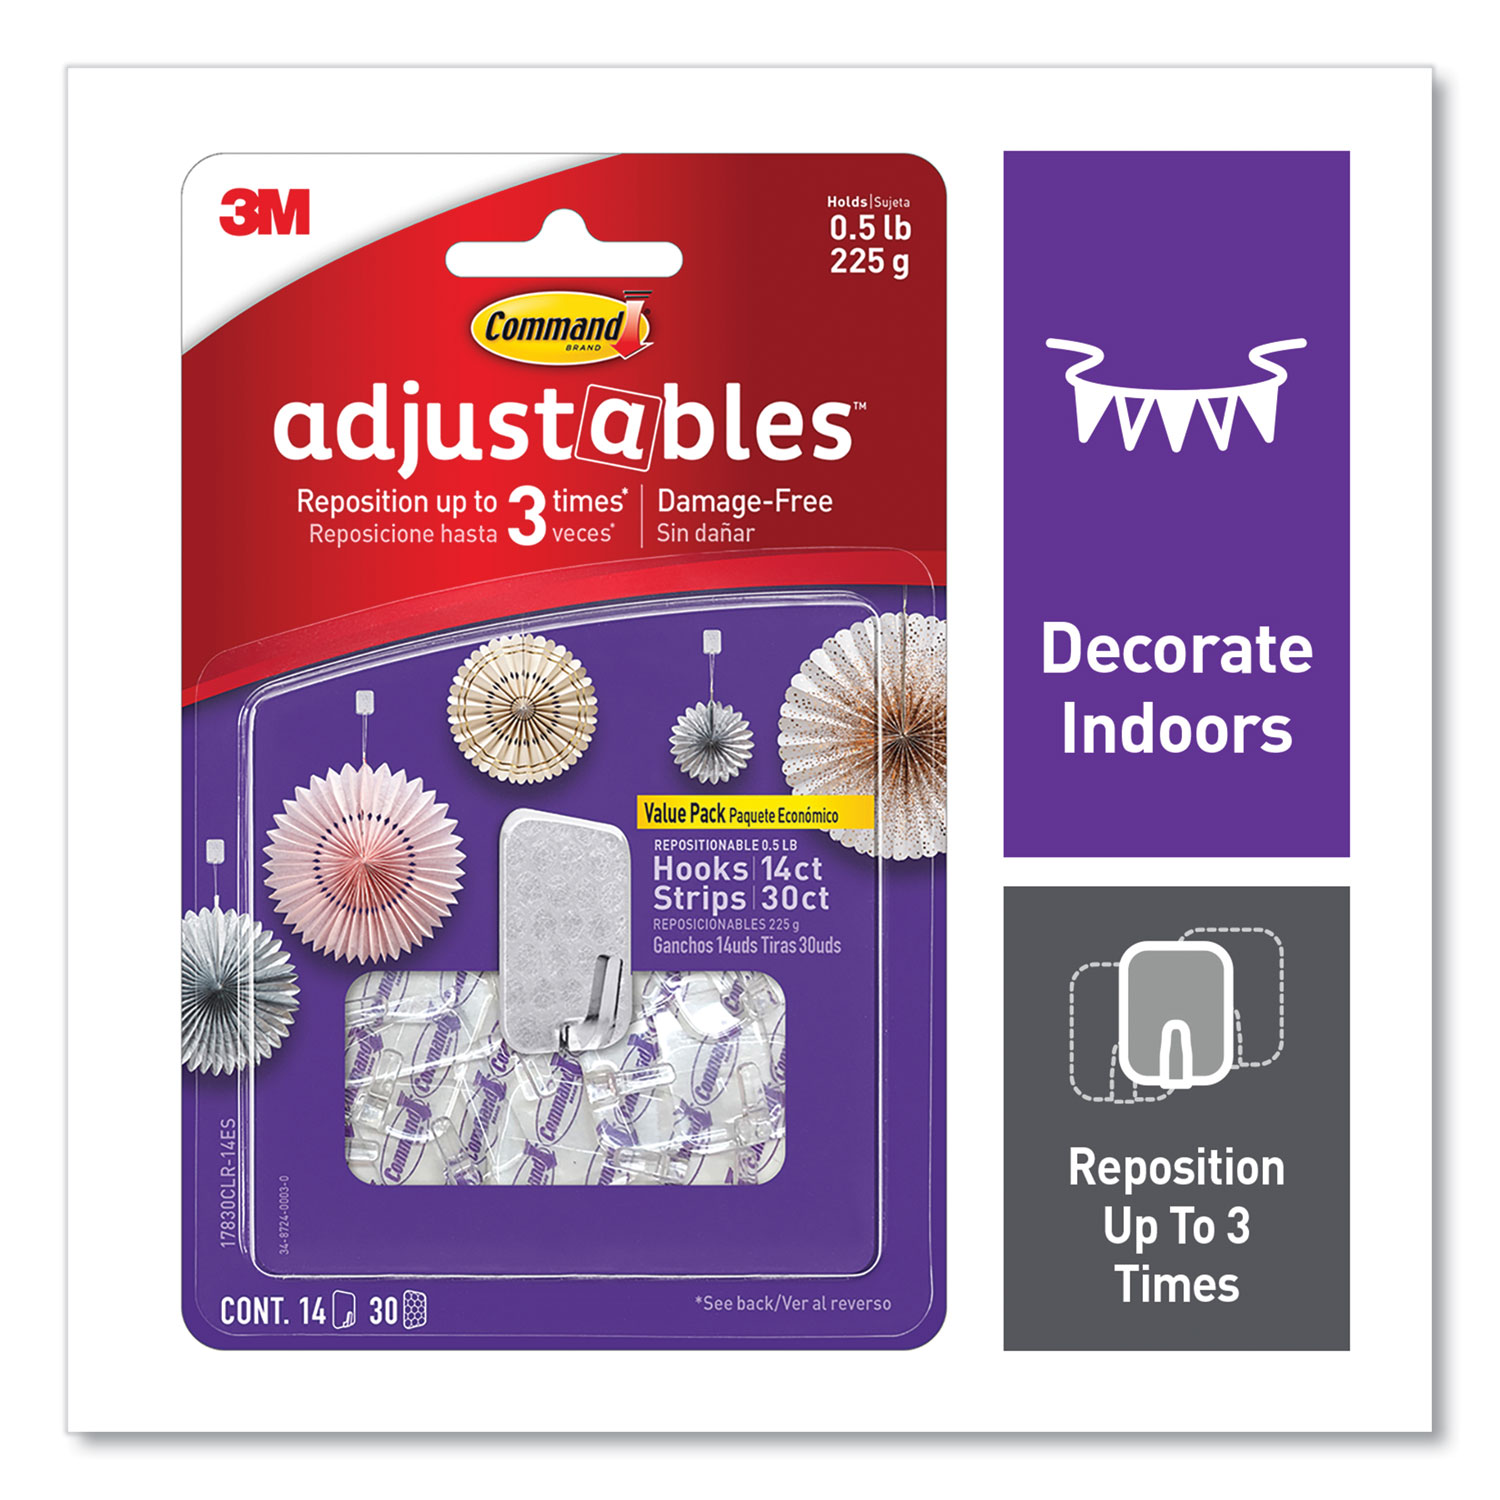  Command 17830CLR-14ES Adjustables Repositionable Mini Hooks, Plastic, White, 0.5 lb Capacity, 14 Hooks and 30 Strips (MMM24399720) 